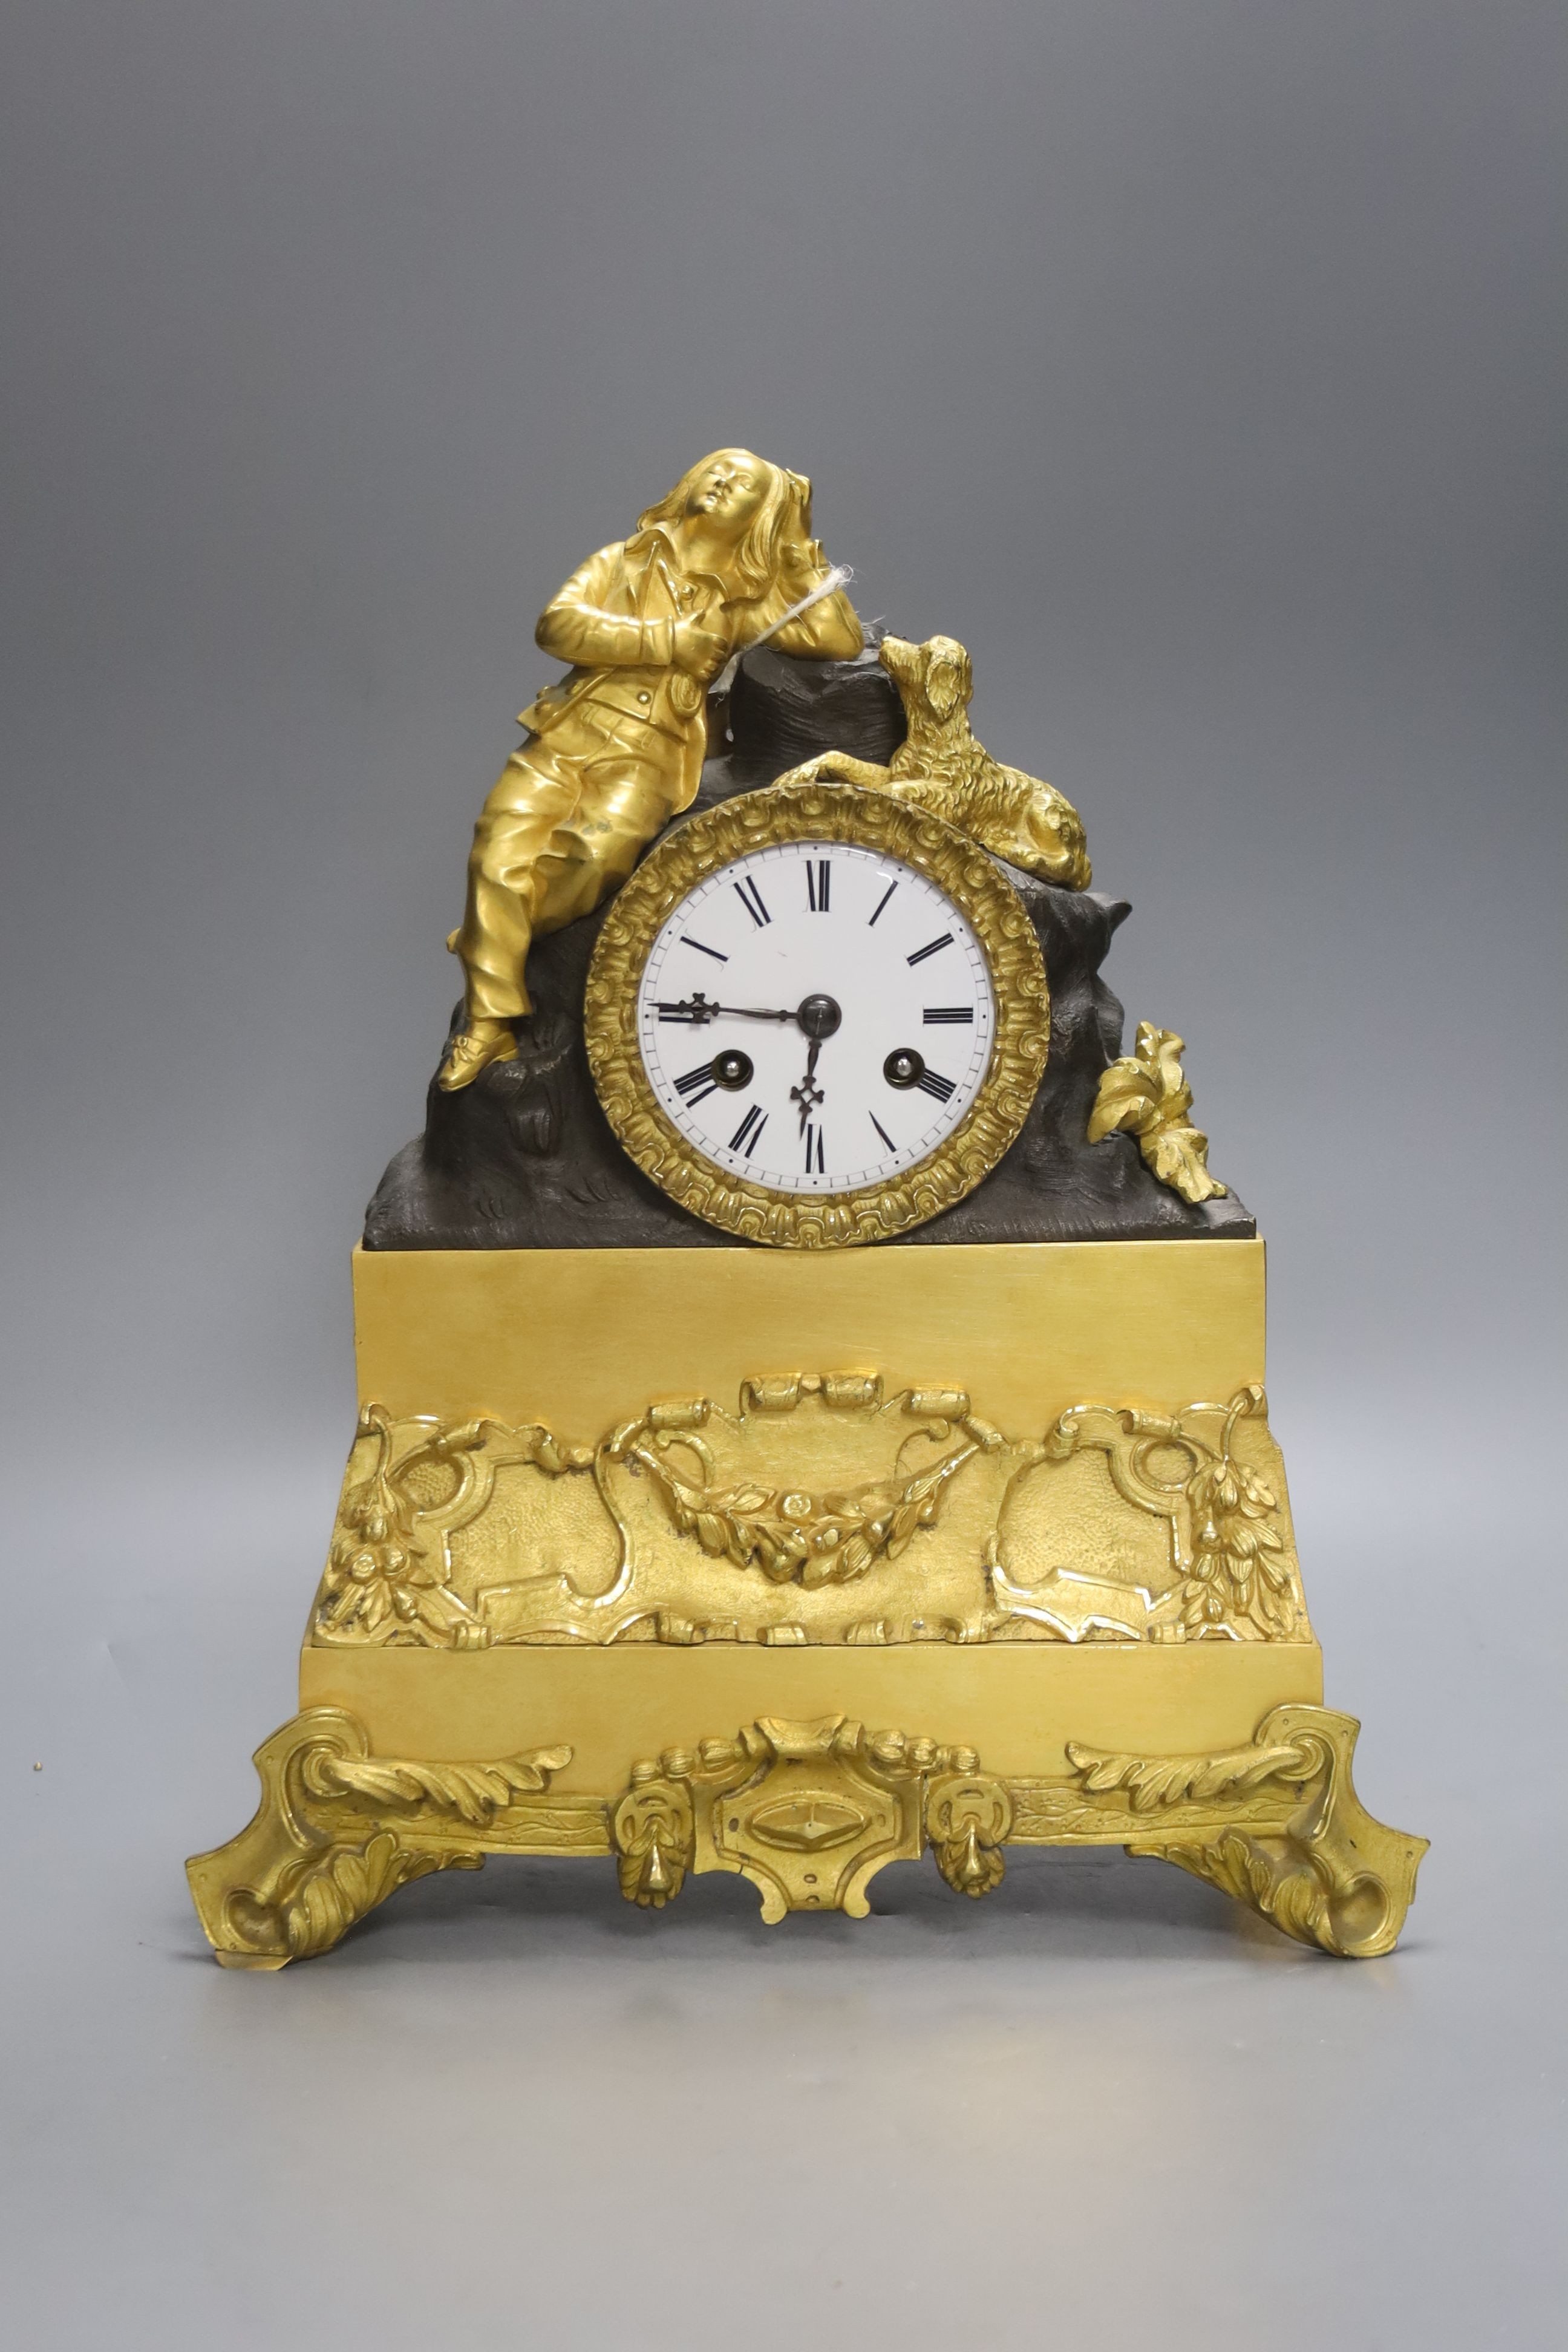 A 19th century French ormolu mantel clock, Marti movement count wheel striking on a bell, with pendulum, 31cm high